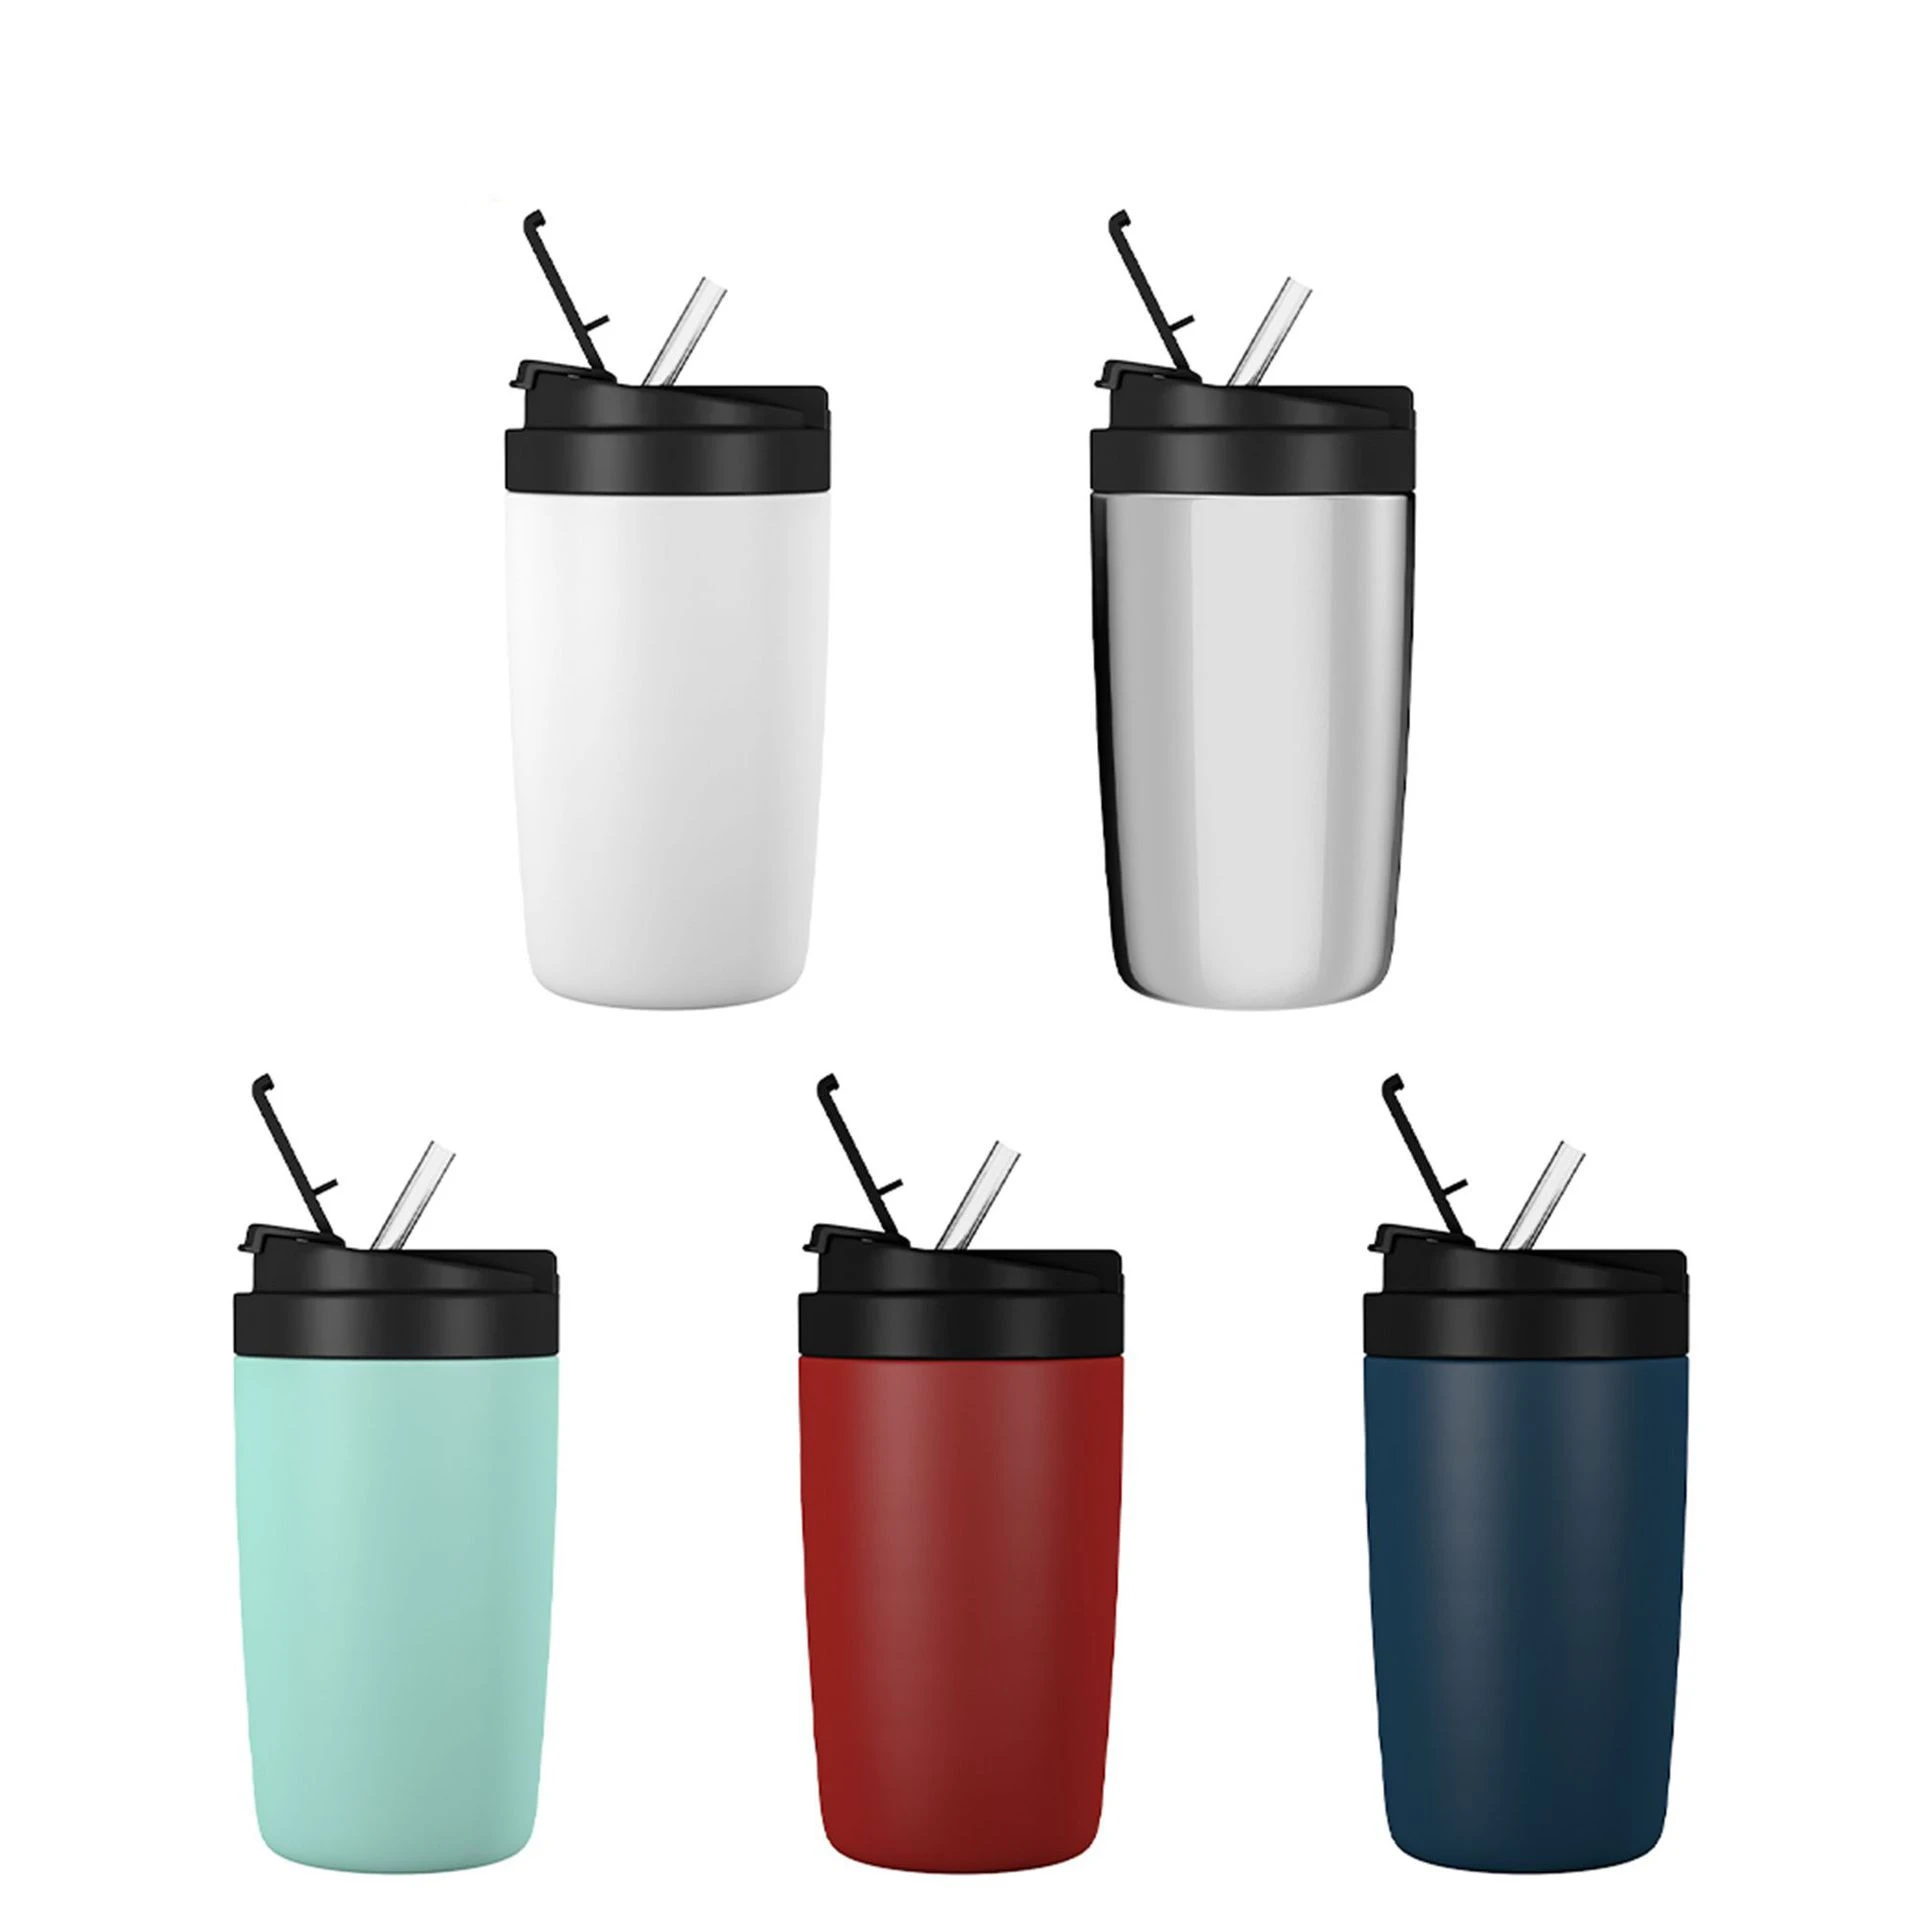 Amazon New 500ml Stainless Steel Coffee Travel Mug Double Wall Vacuum Insulated Tumbler with Straw